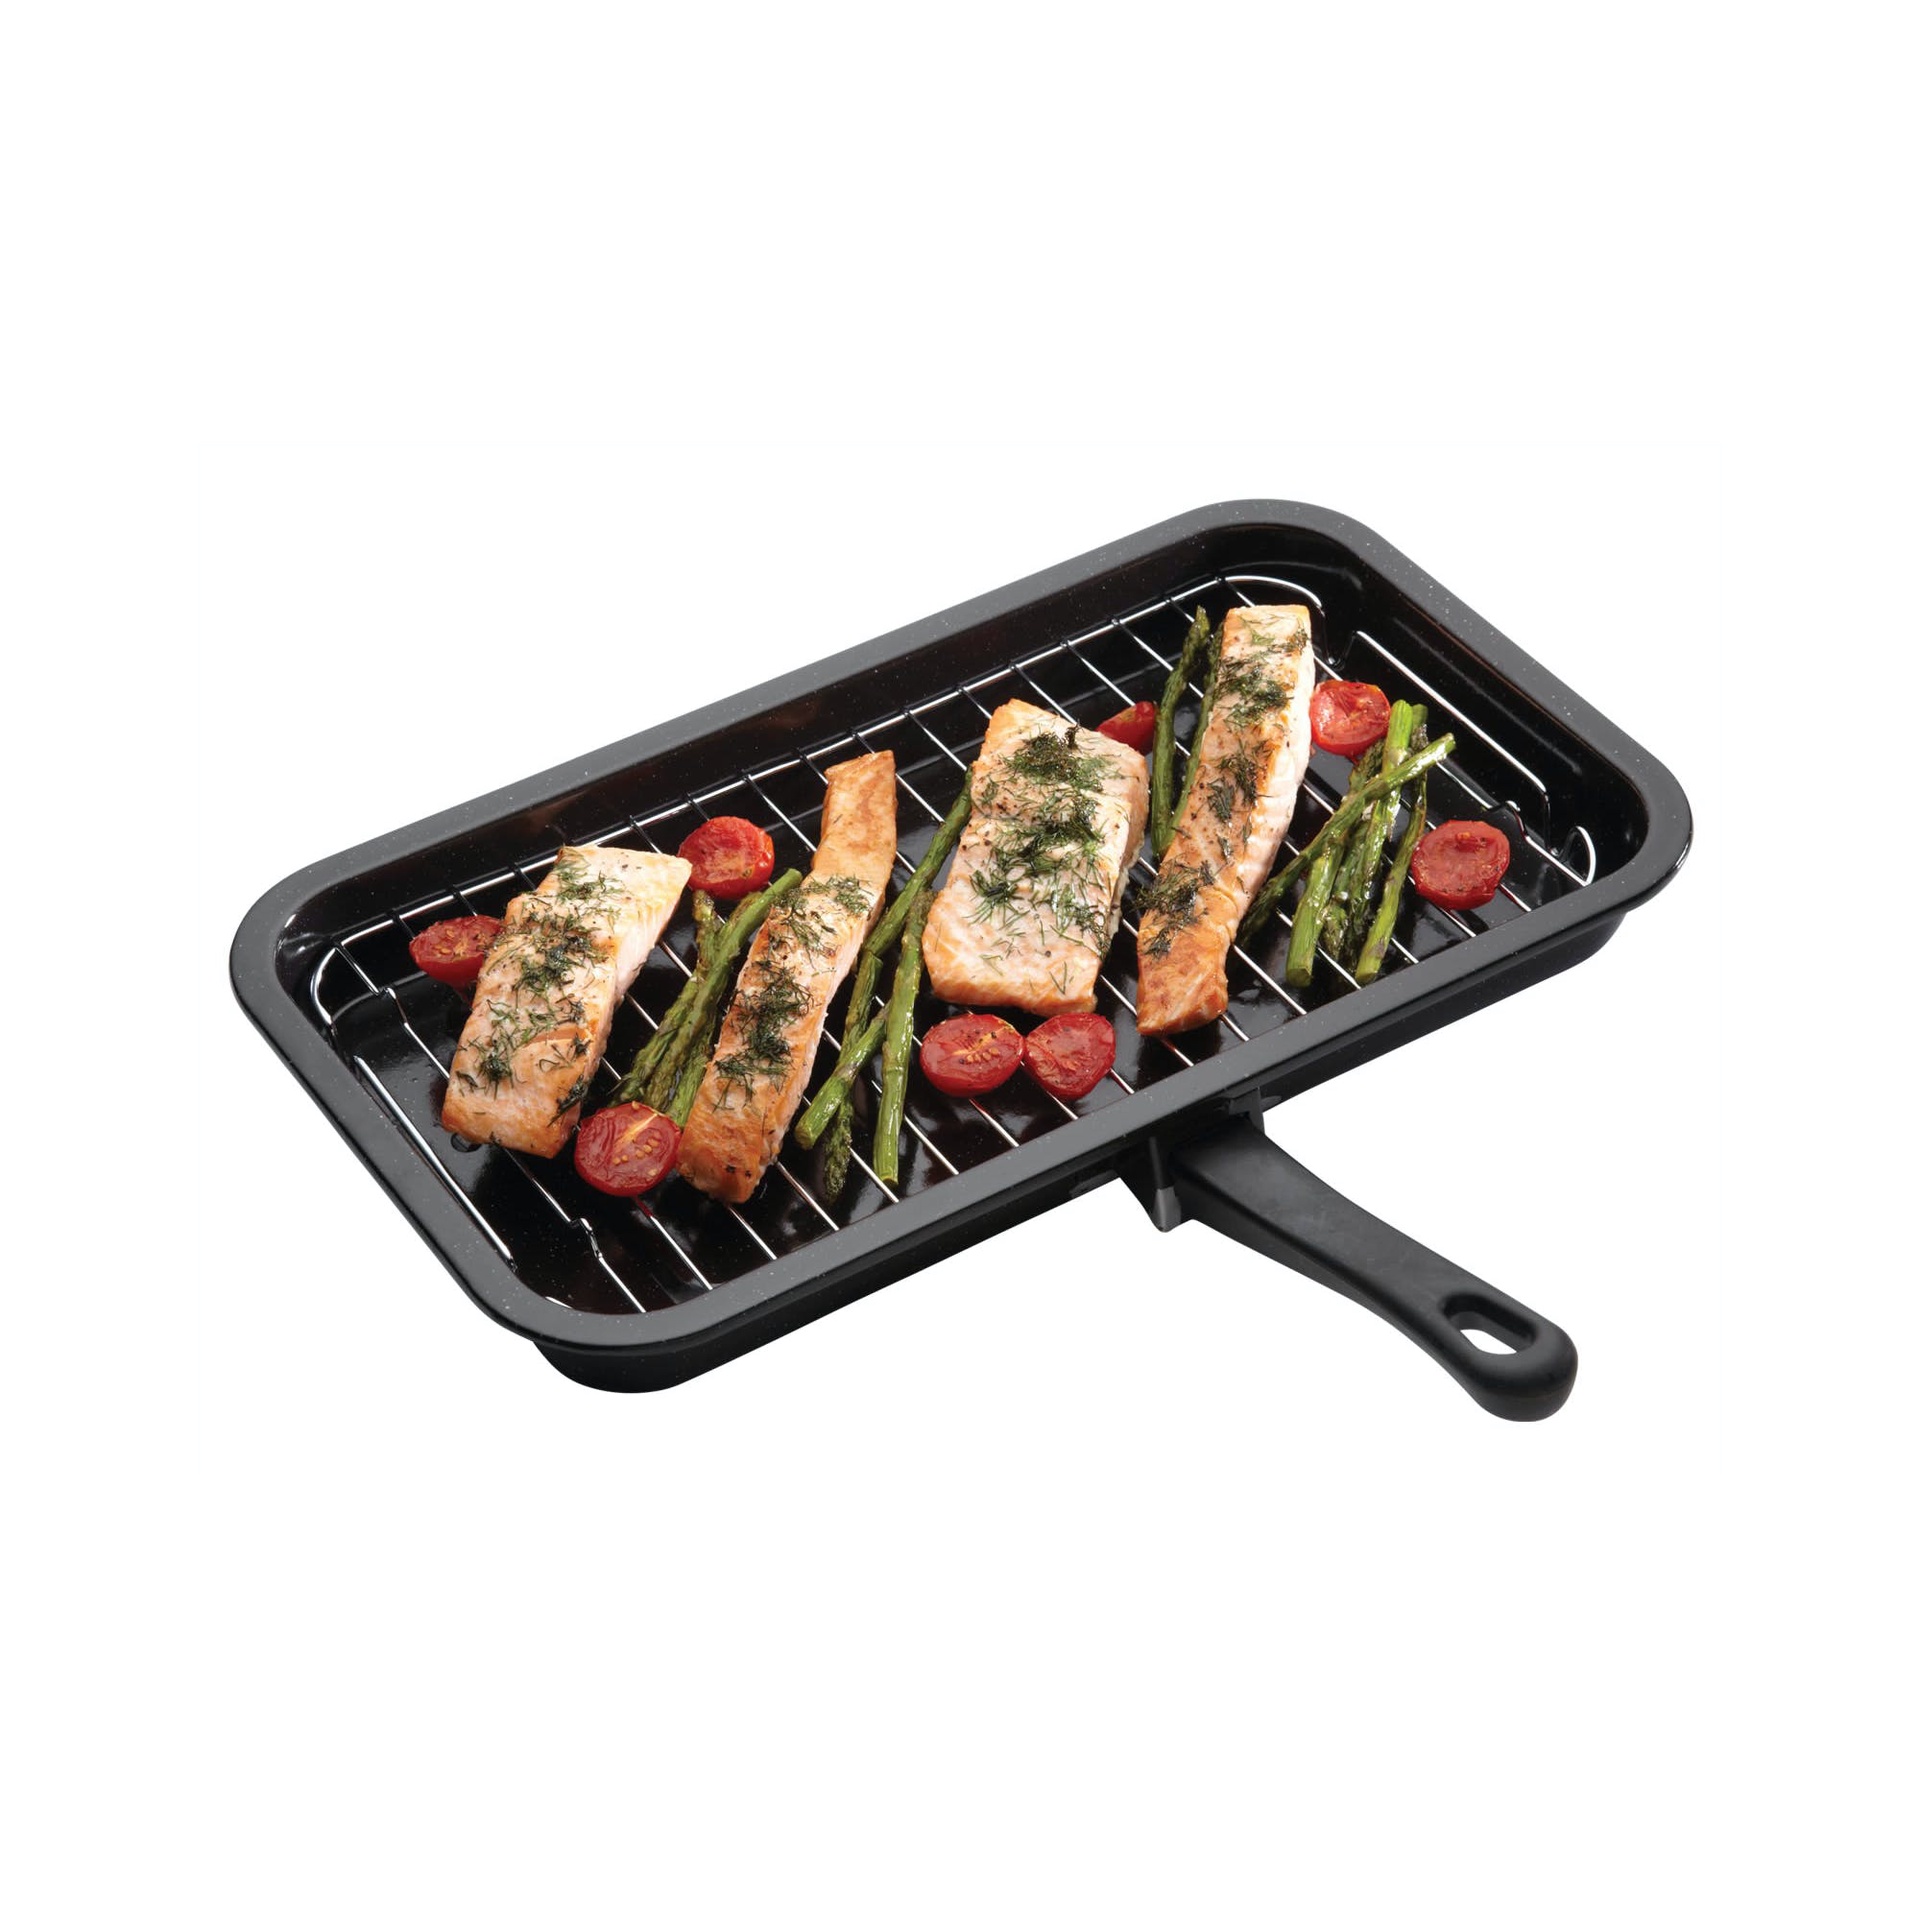 Small Single detachable Handled Enamelled Grill Pan for Hygena Oven Cooker 